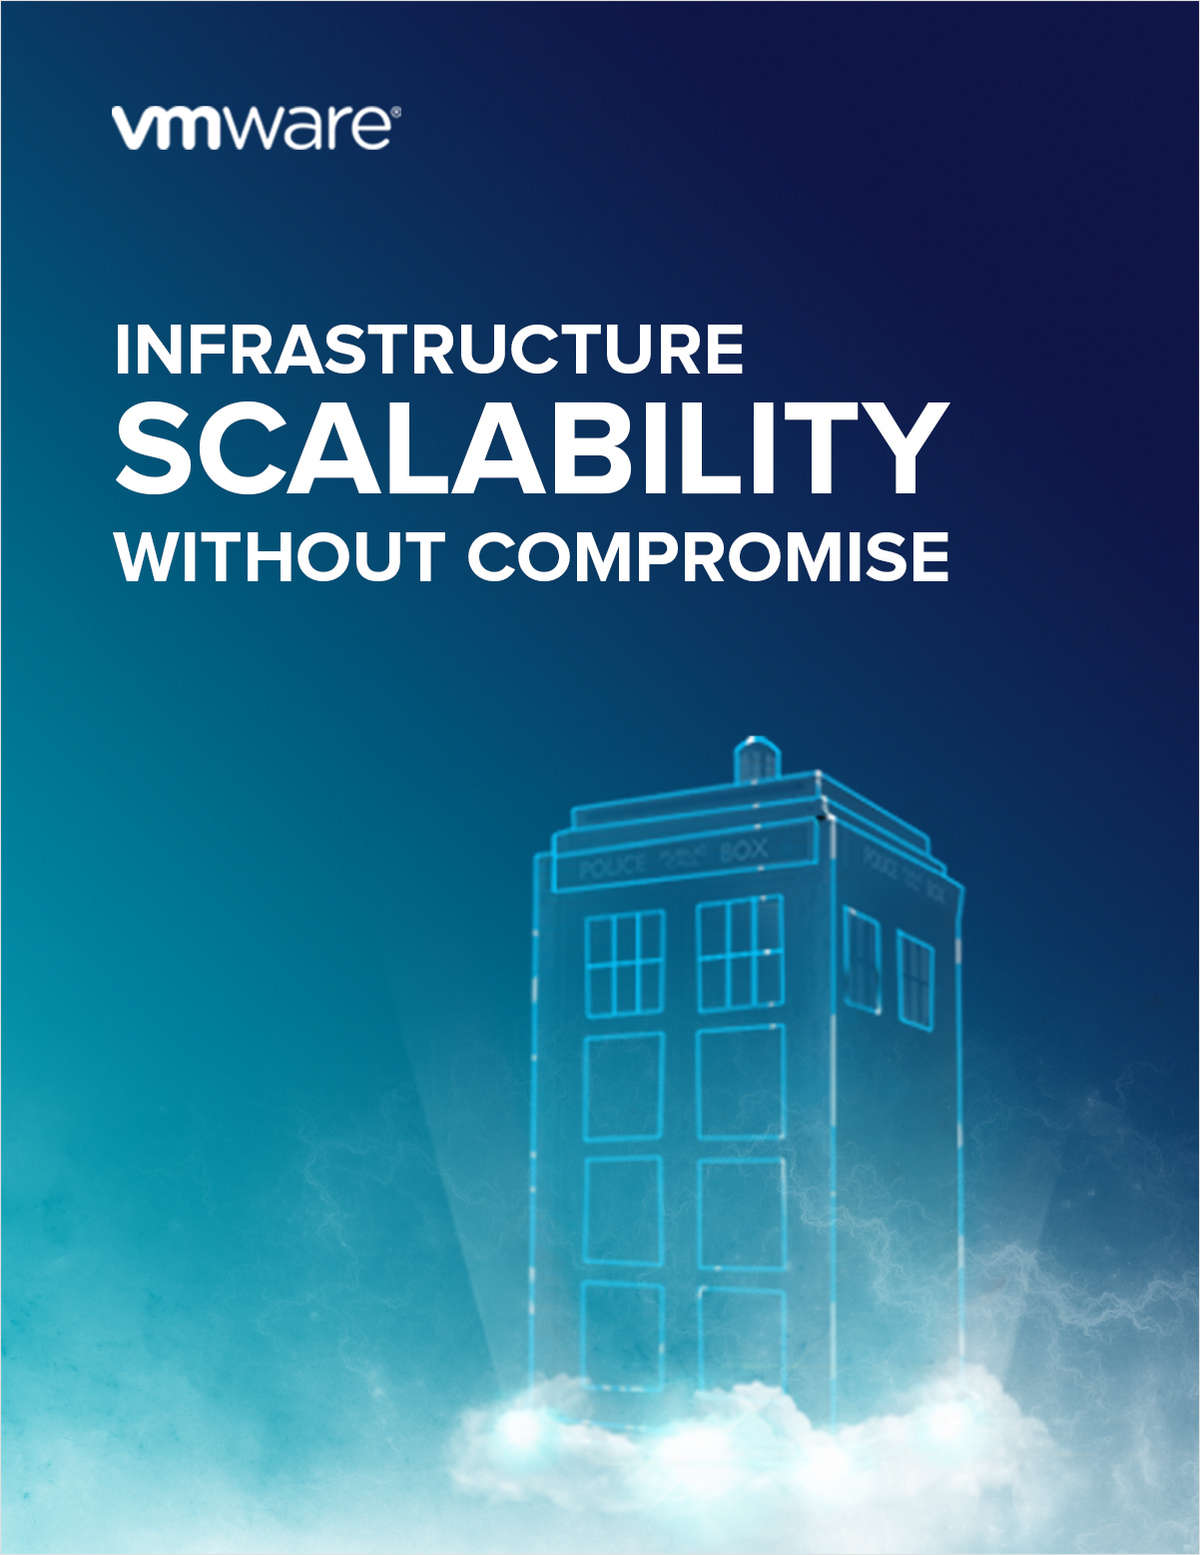 Evolve without risk. Modernise with Hyper Converged IT for infrastructure scalability without compromise